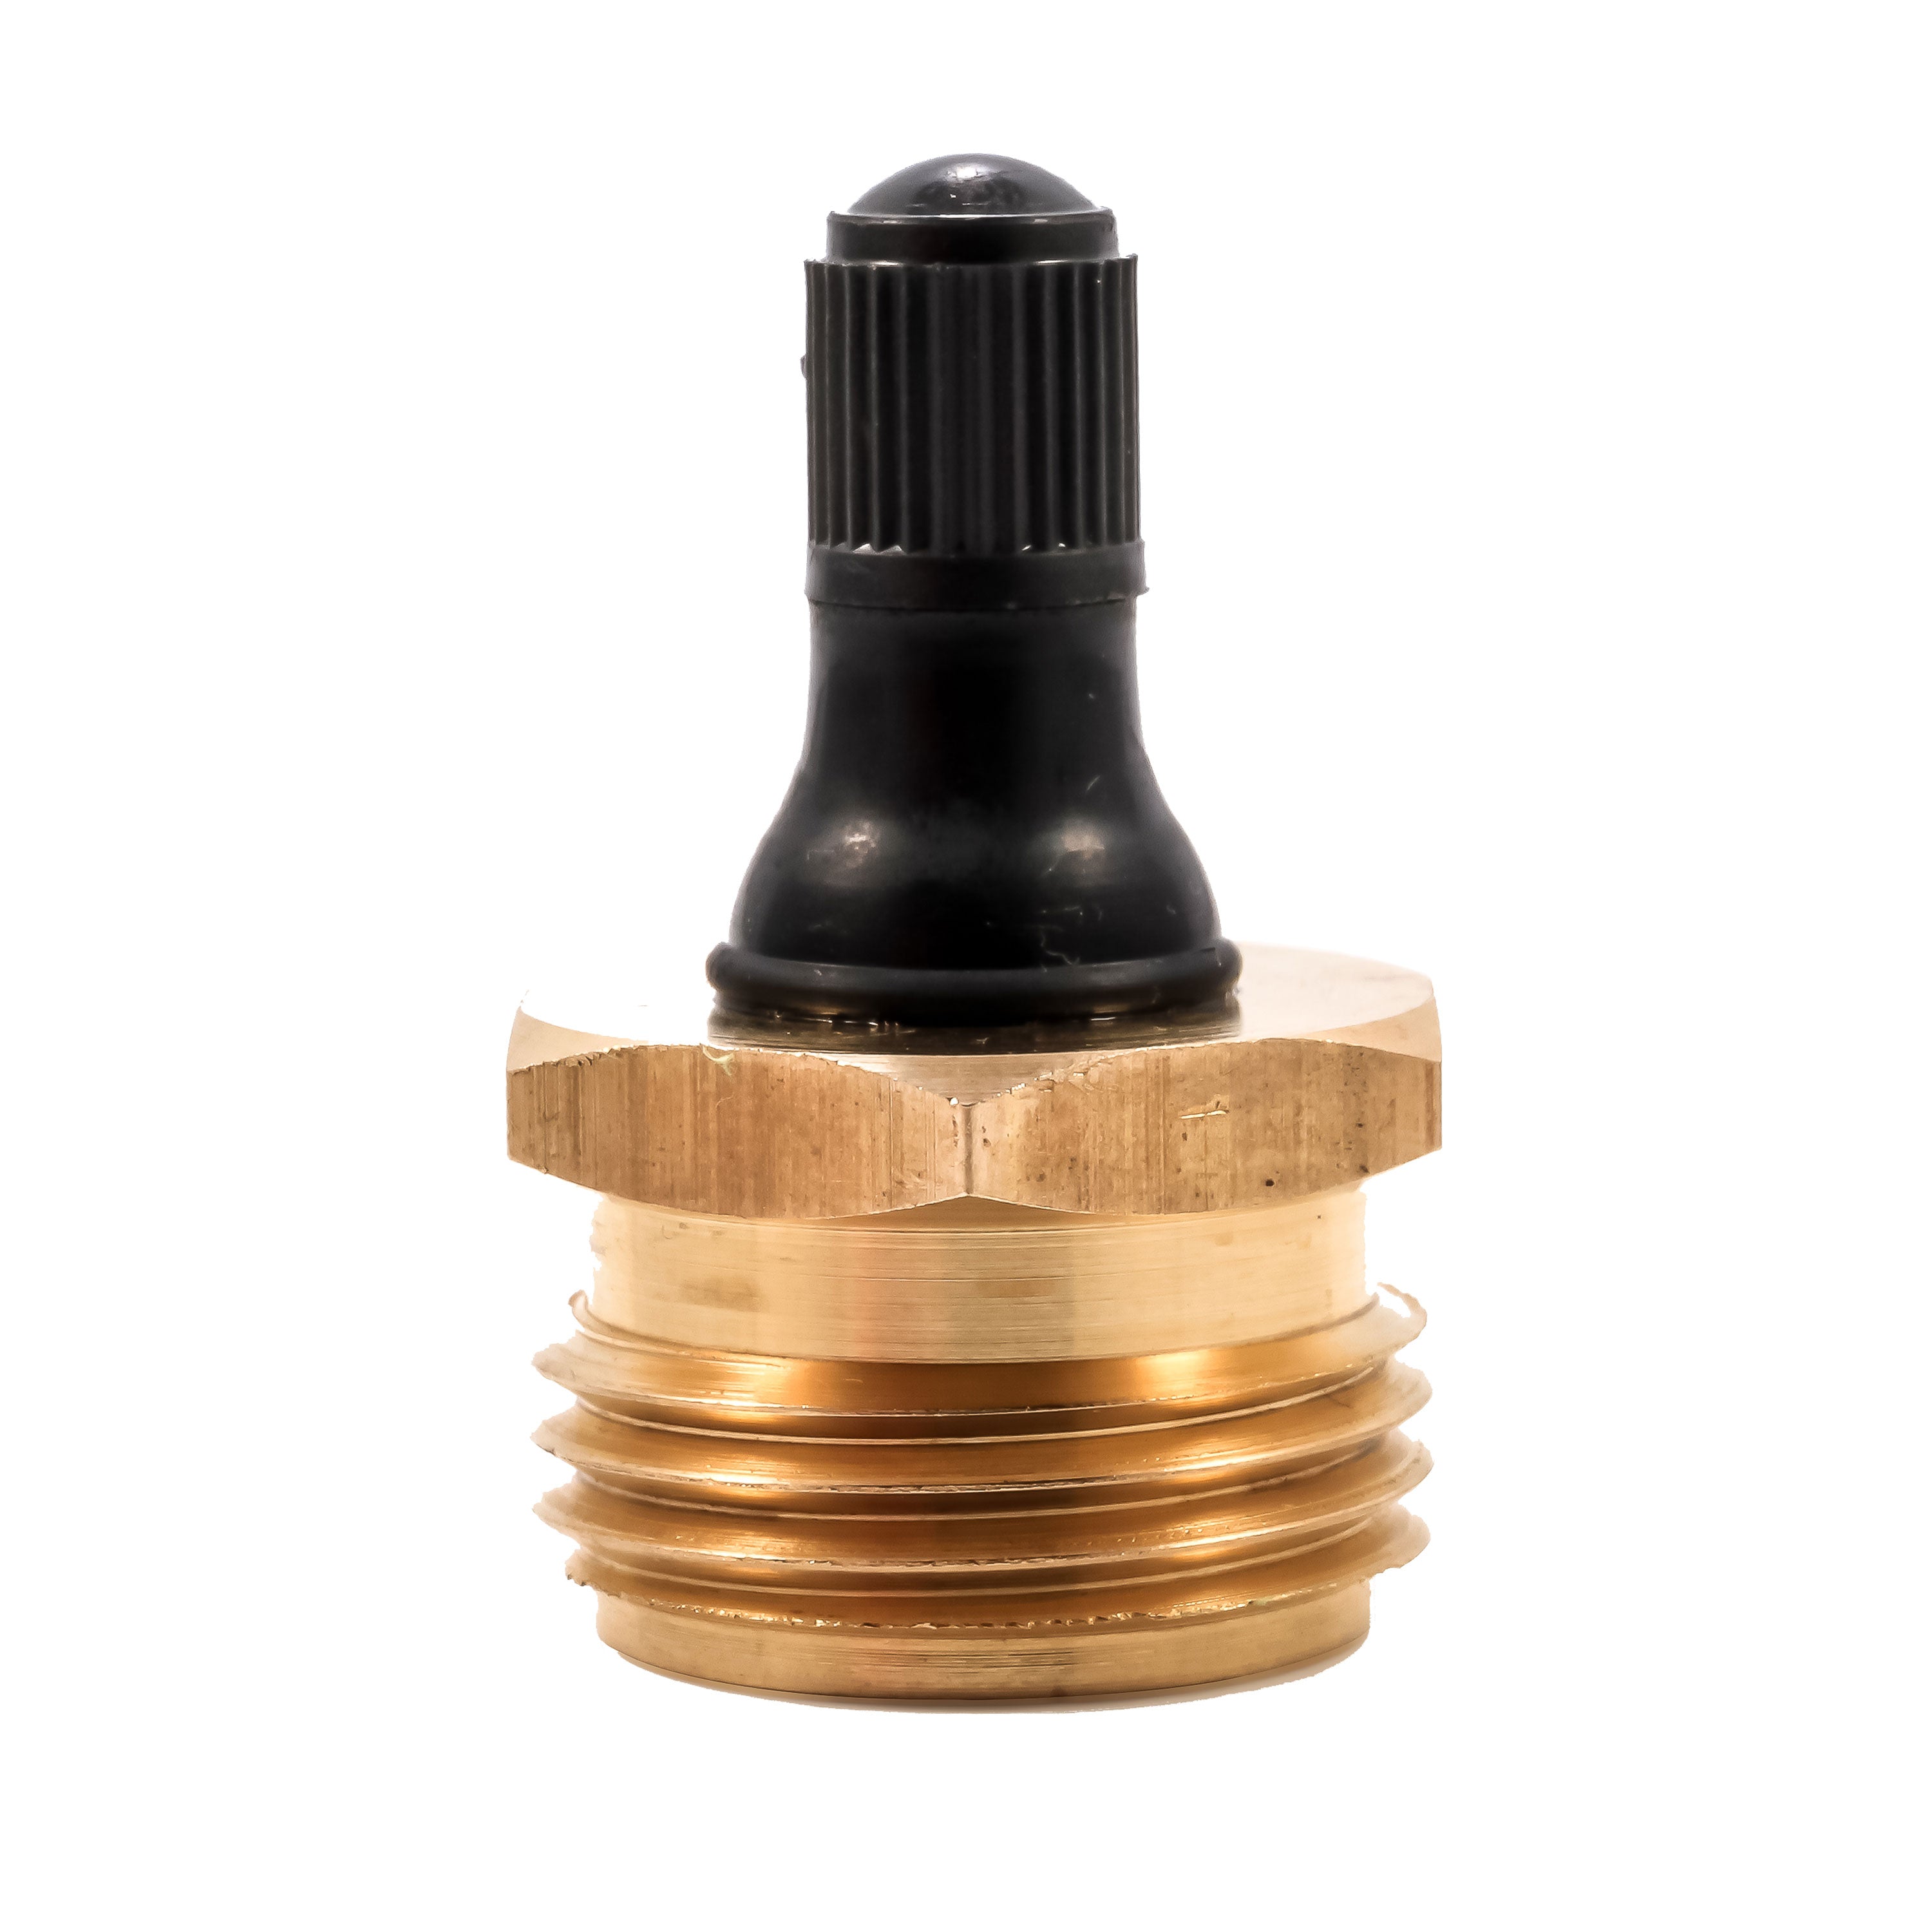 Camco 36153 Blow Out Plug - Brass